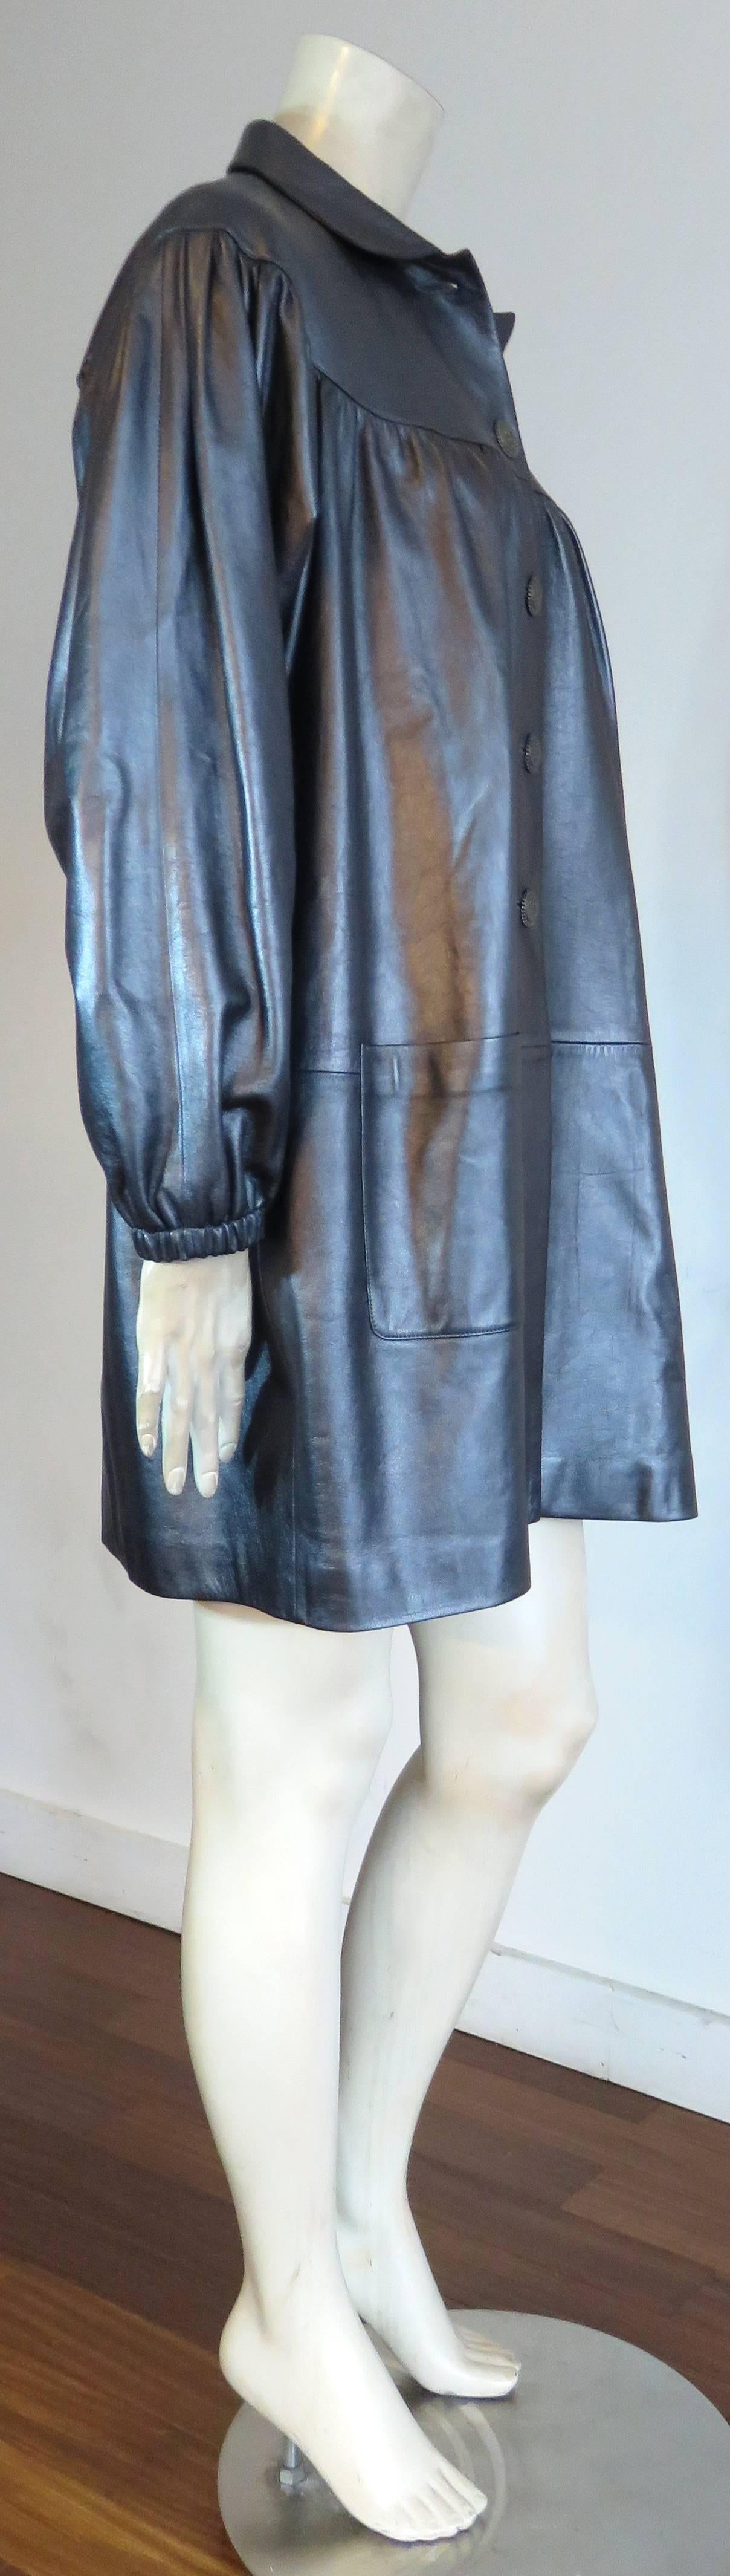 CHANEL PARIS Pewter lambskin leather coat - worn once In Excellent Condition For Sale In Newport Beach, CA